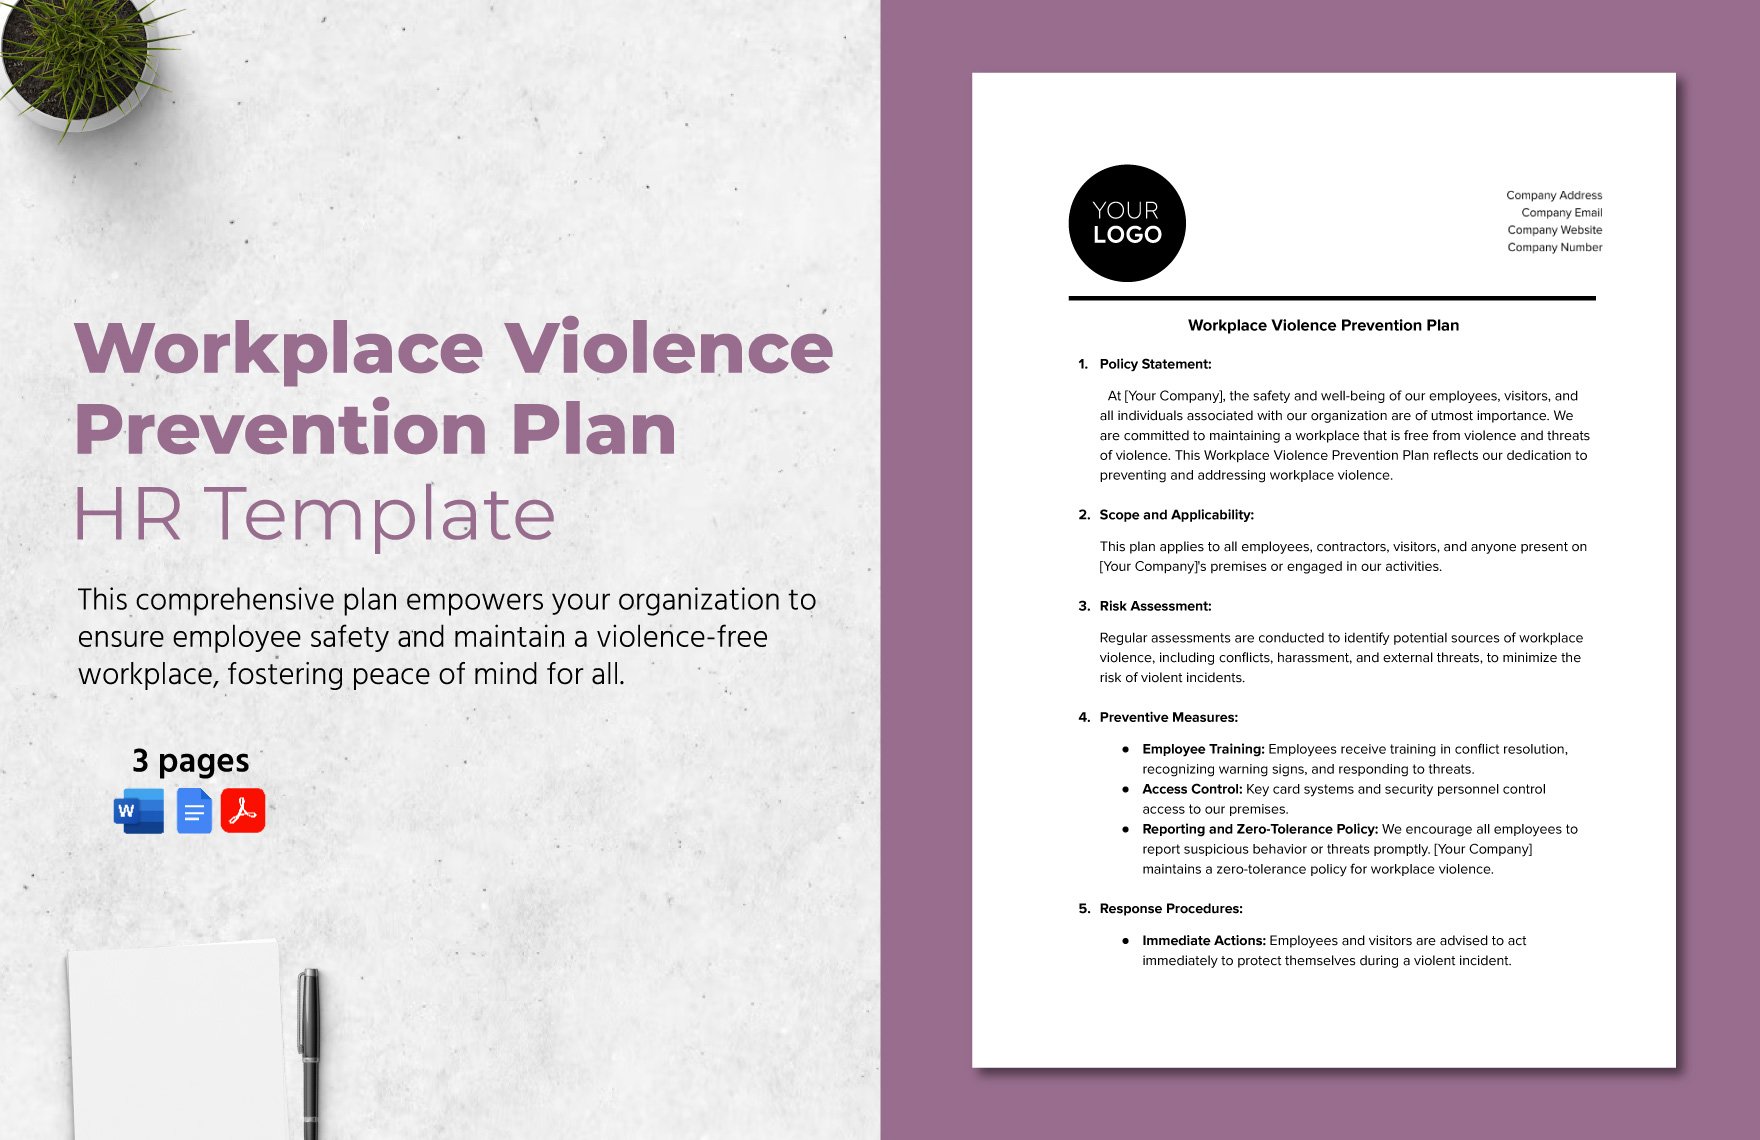 Workplace Violence Prevention Plan HR Template